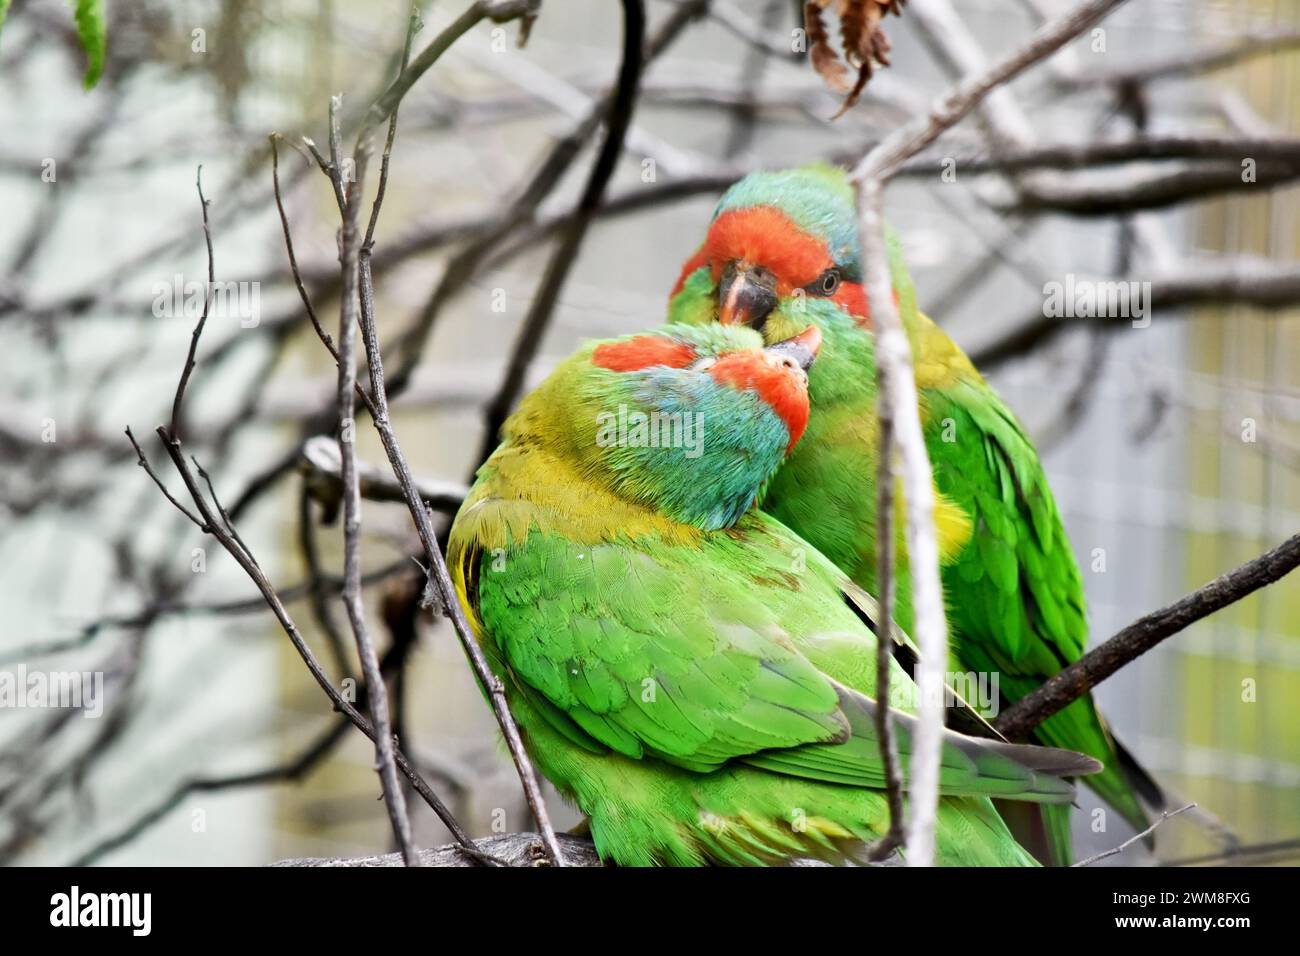 The musk lorikeet is mainly green and it is identified by its red forehead, blue crown and a distinctive yellow band on its wing. Stock Photo